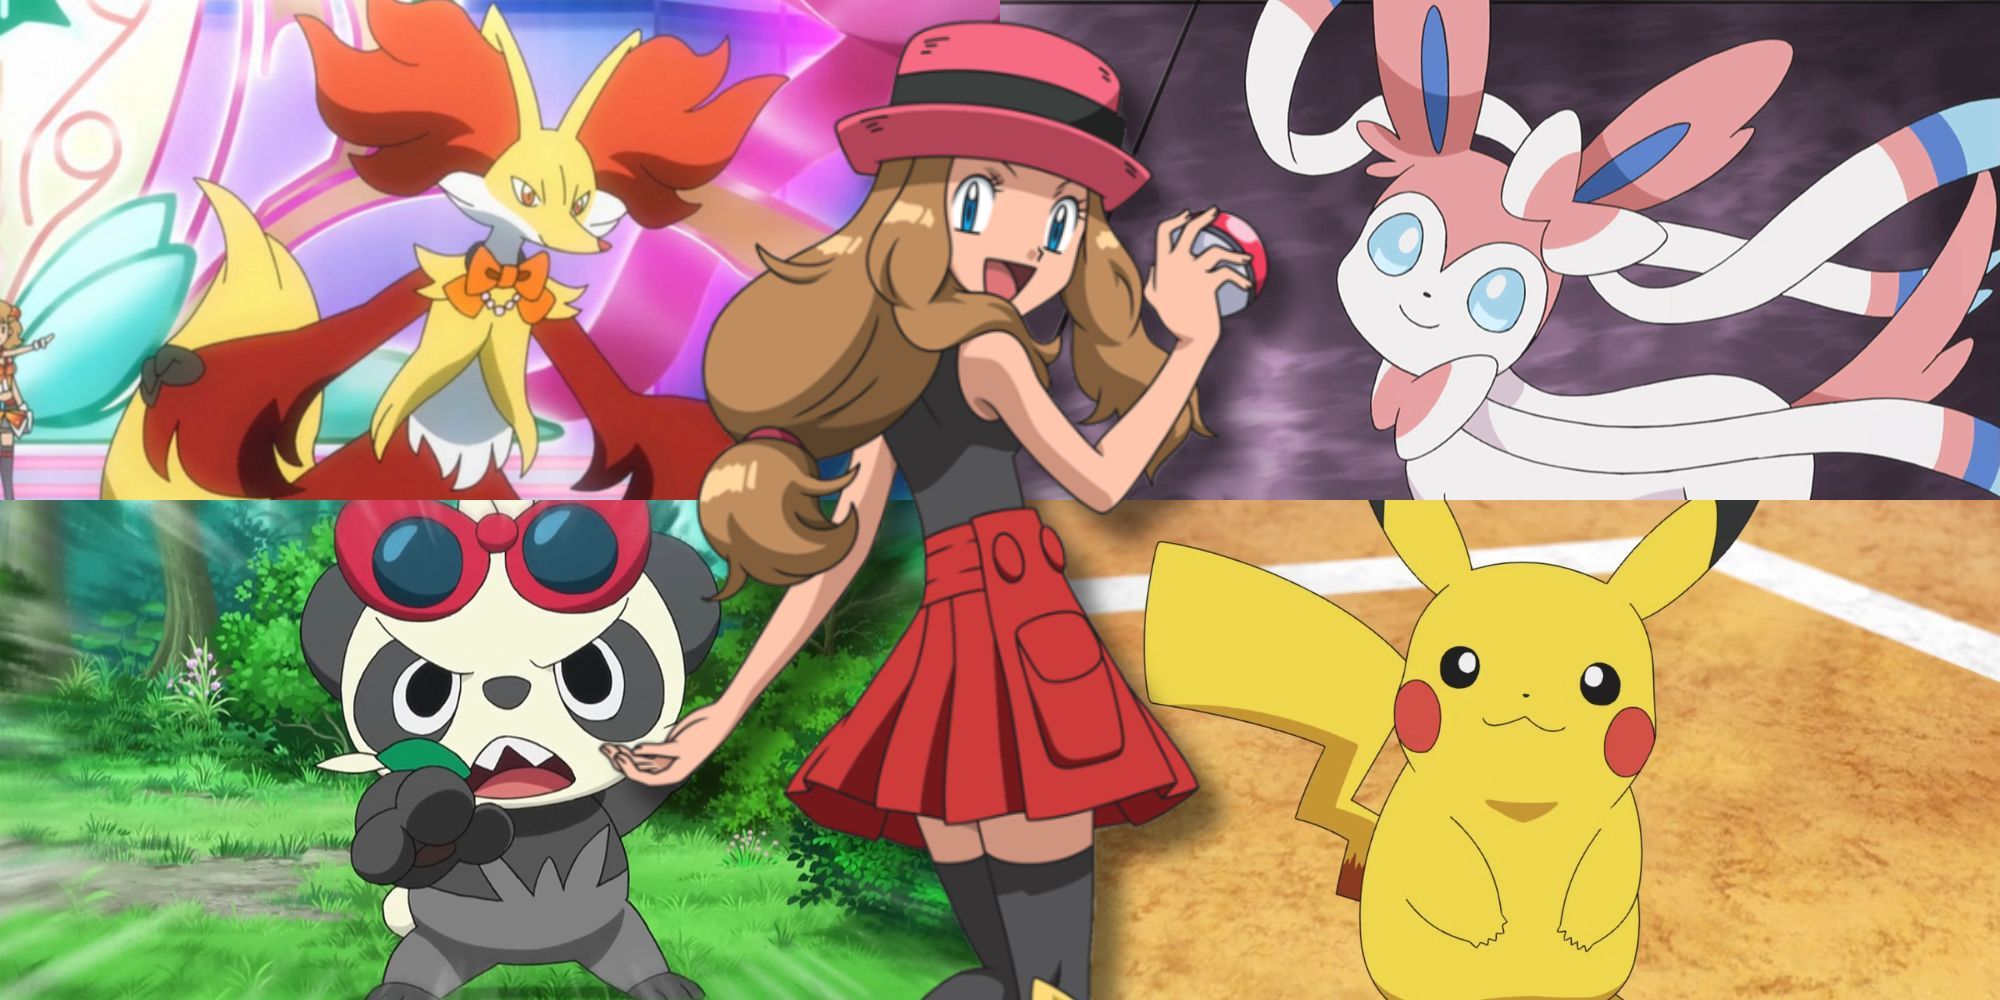 A collage of Serena and her Pokemon: Delphox, Sylveon, Pancham and Ash's Pikachu.